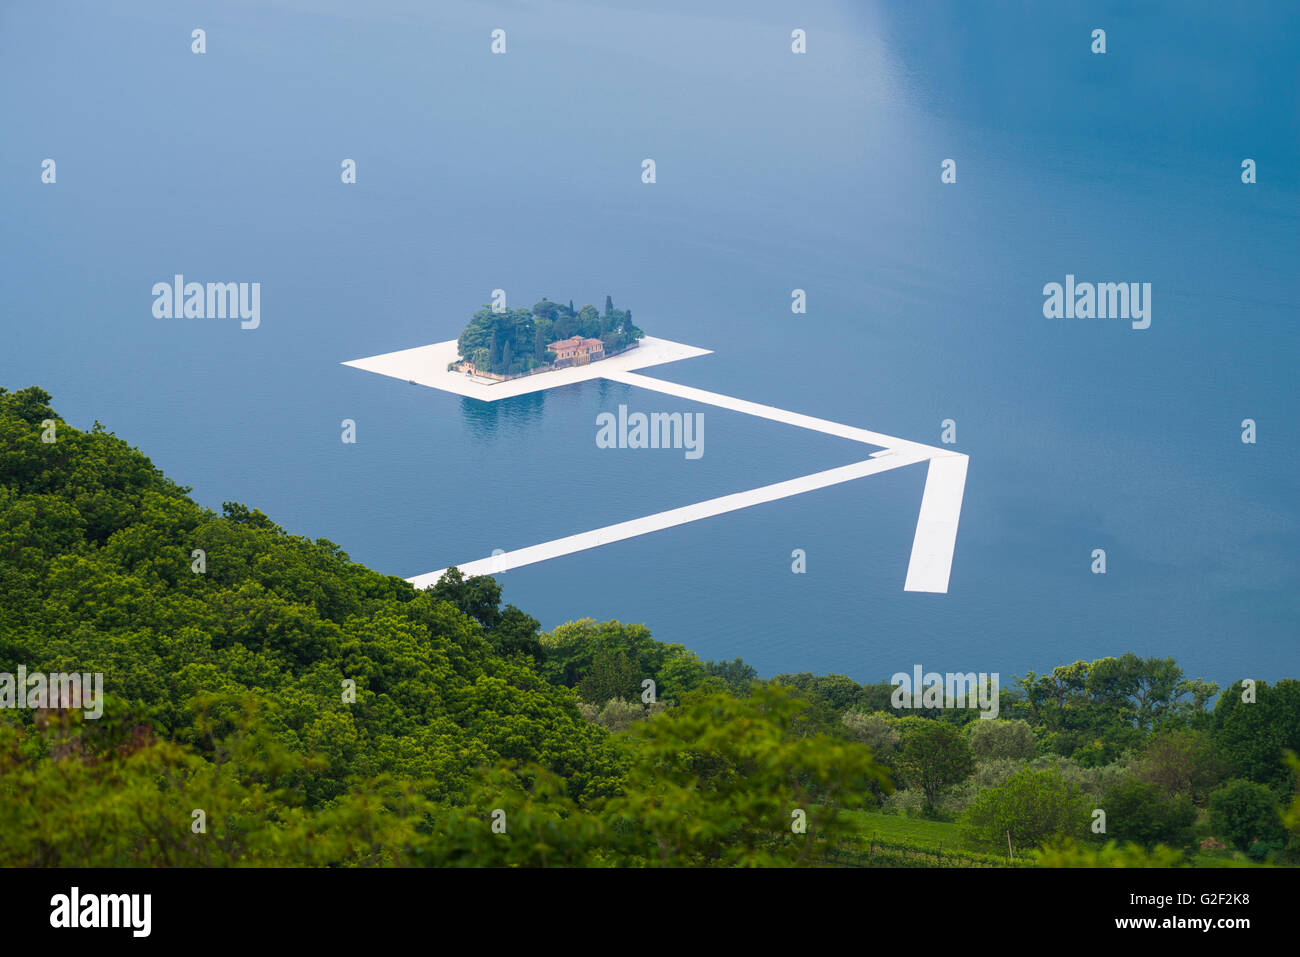 Swimming pontons form a giant arrow at Saint Paul island for Christo's project 'The floating piers' on Lake Iseo, Italy Stock Photo